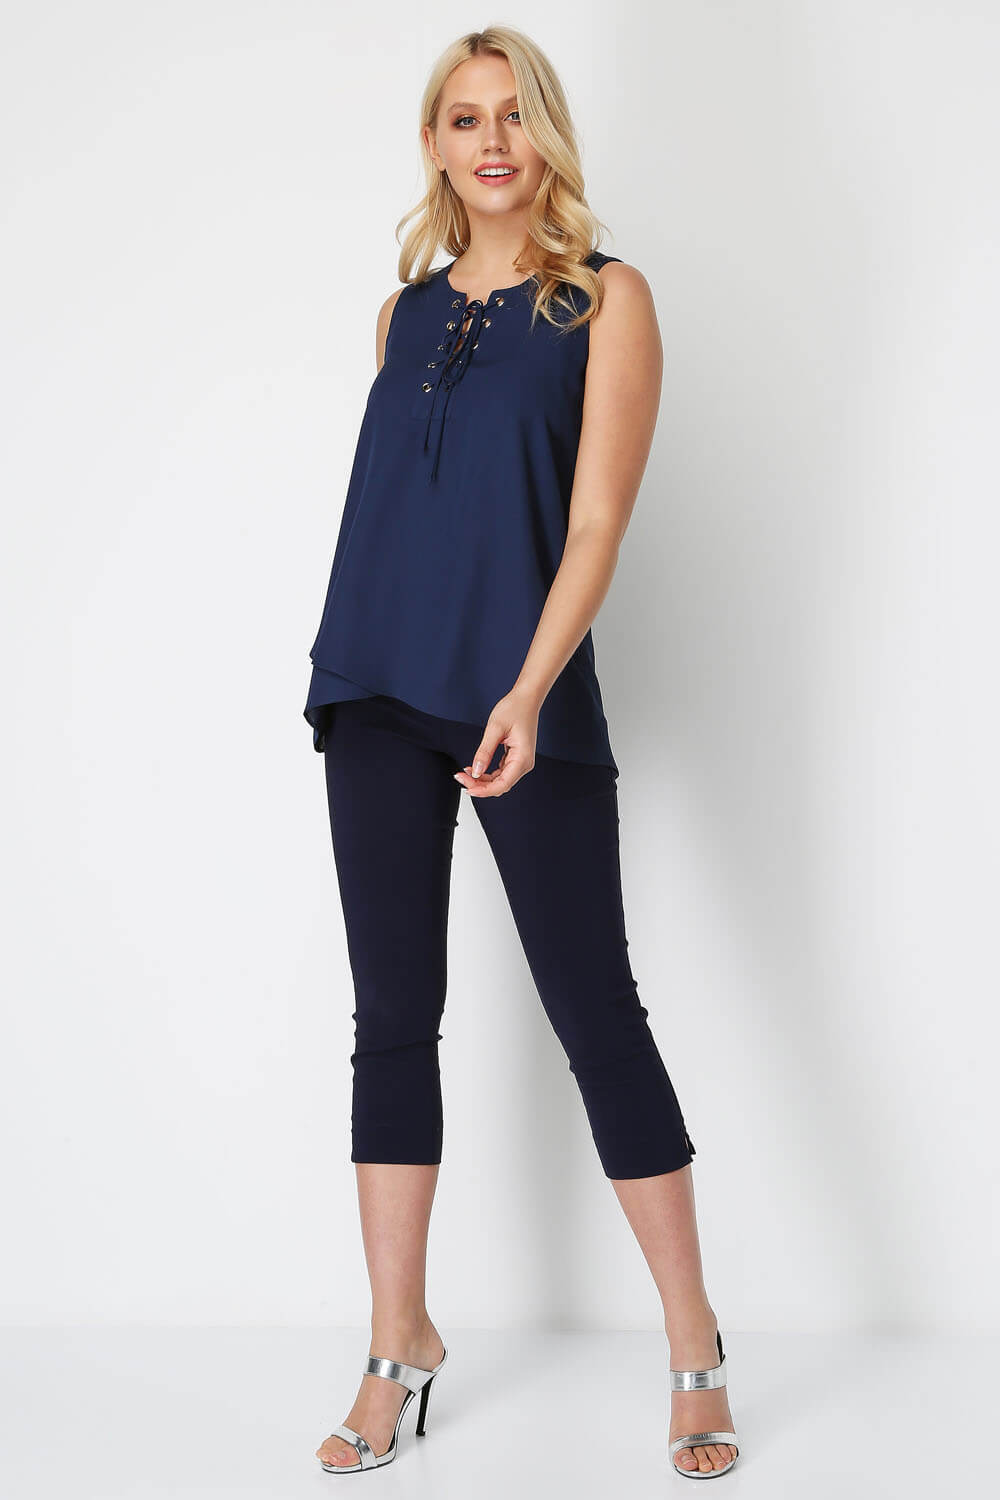 Navy  Eyelet Detail Lace Up Vest Top, Image 2 of 5